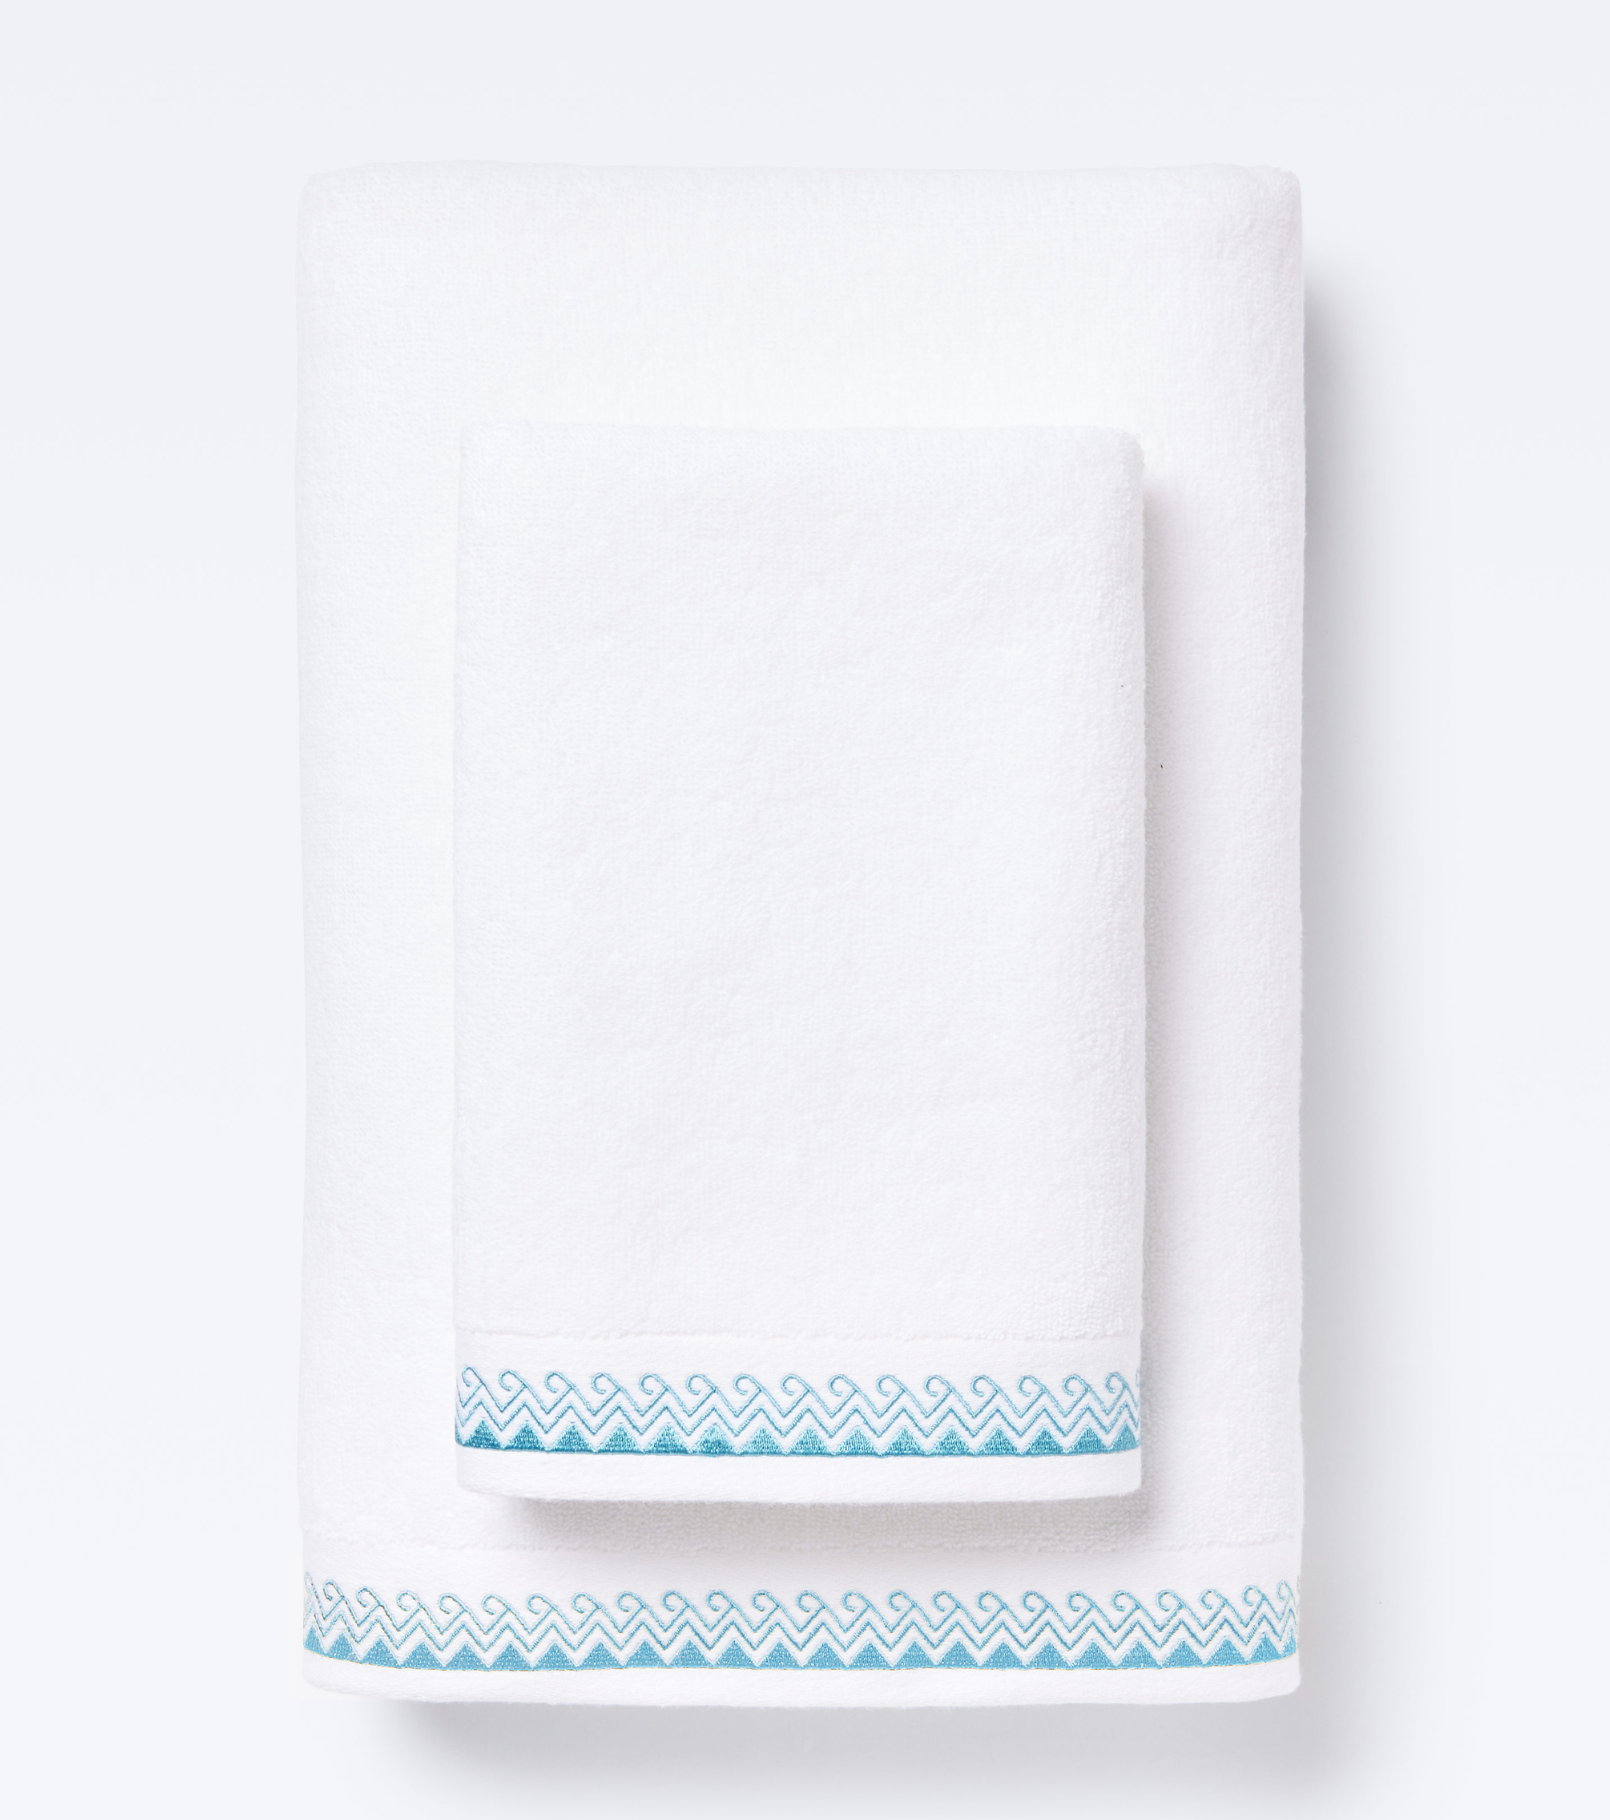 Averylily Wind + Wave Bath and Hand Towels in White with Sky Blue trim, made from 600-gram weight pure Aegean cotton.